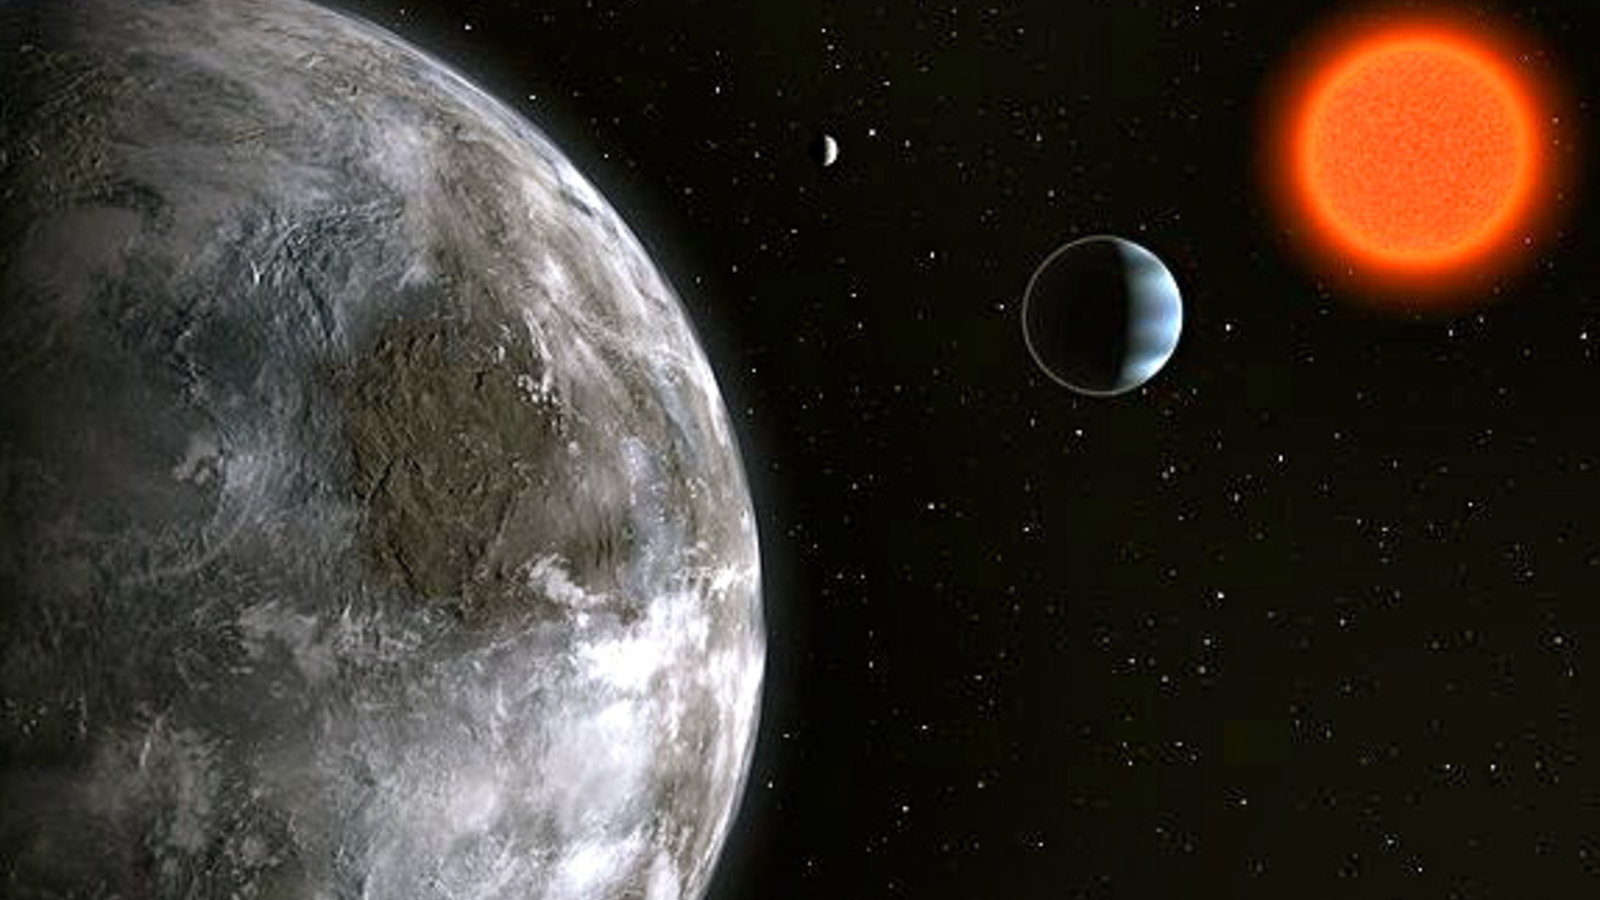 800px-eso_-_the_planetary_system_in_gliese_581_by.jpg